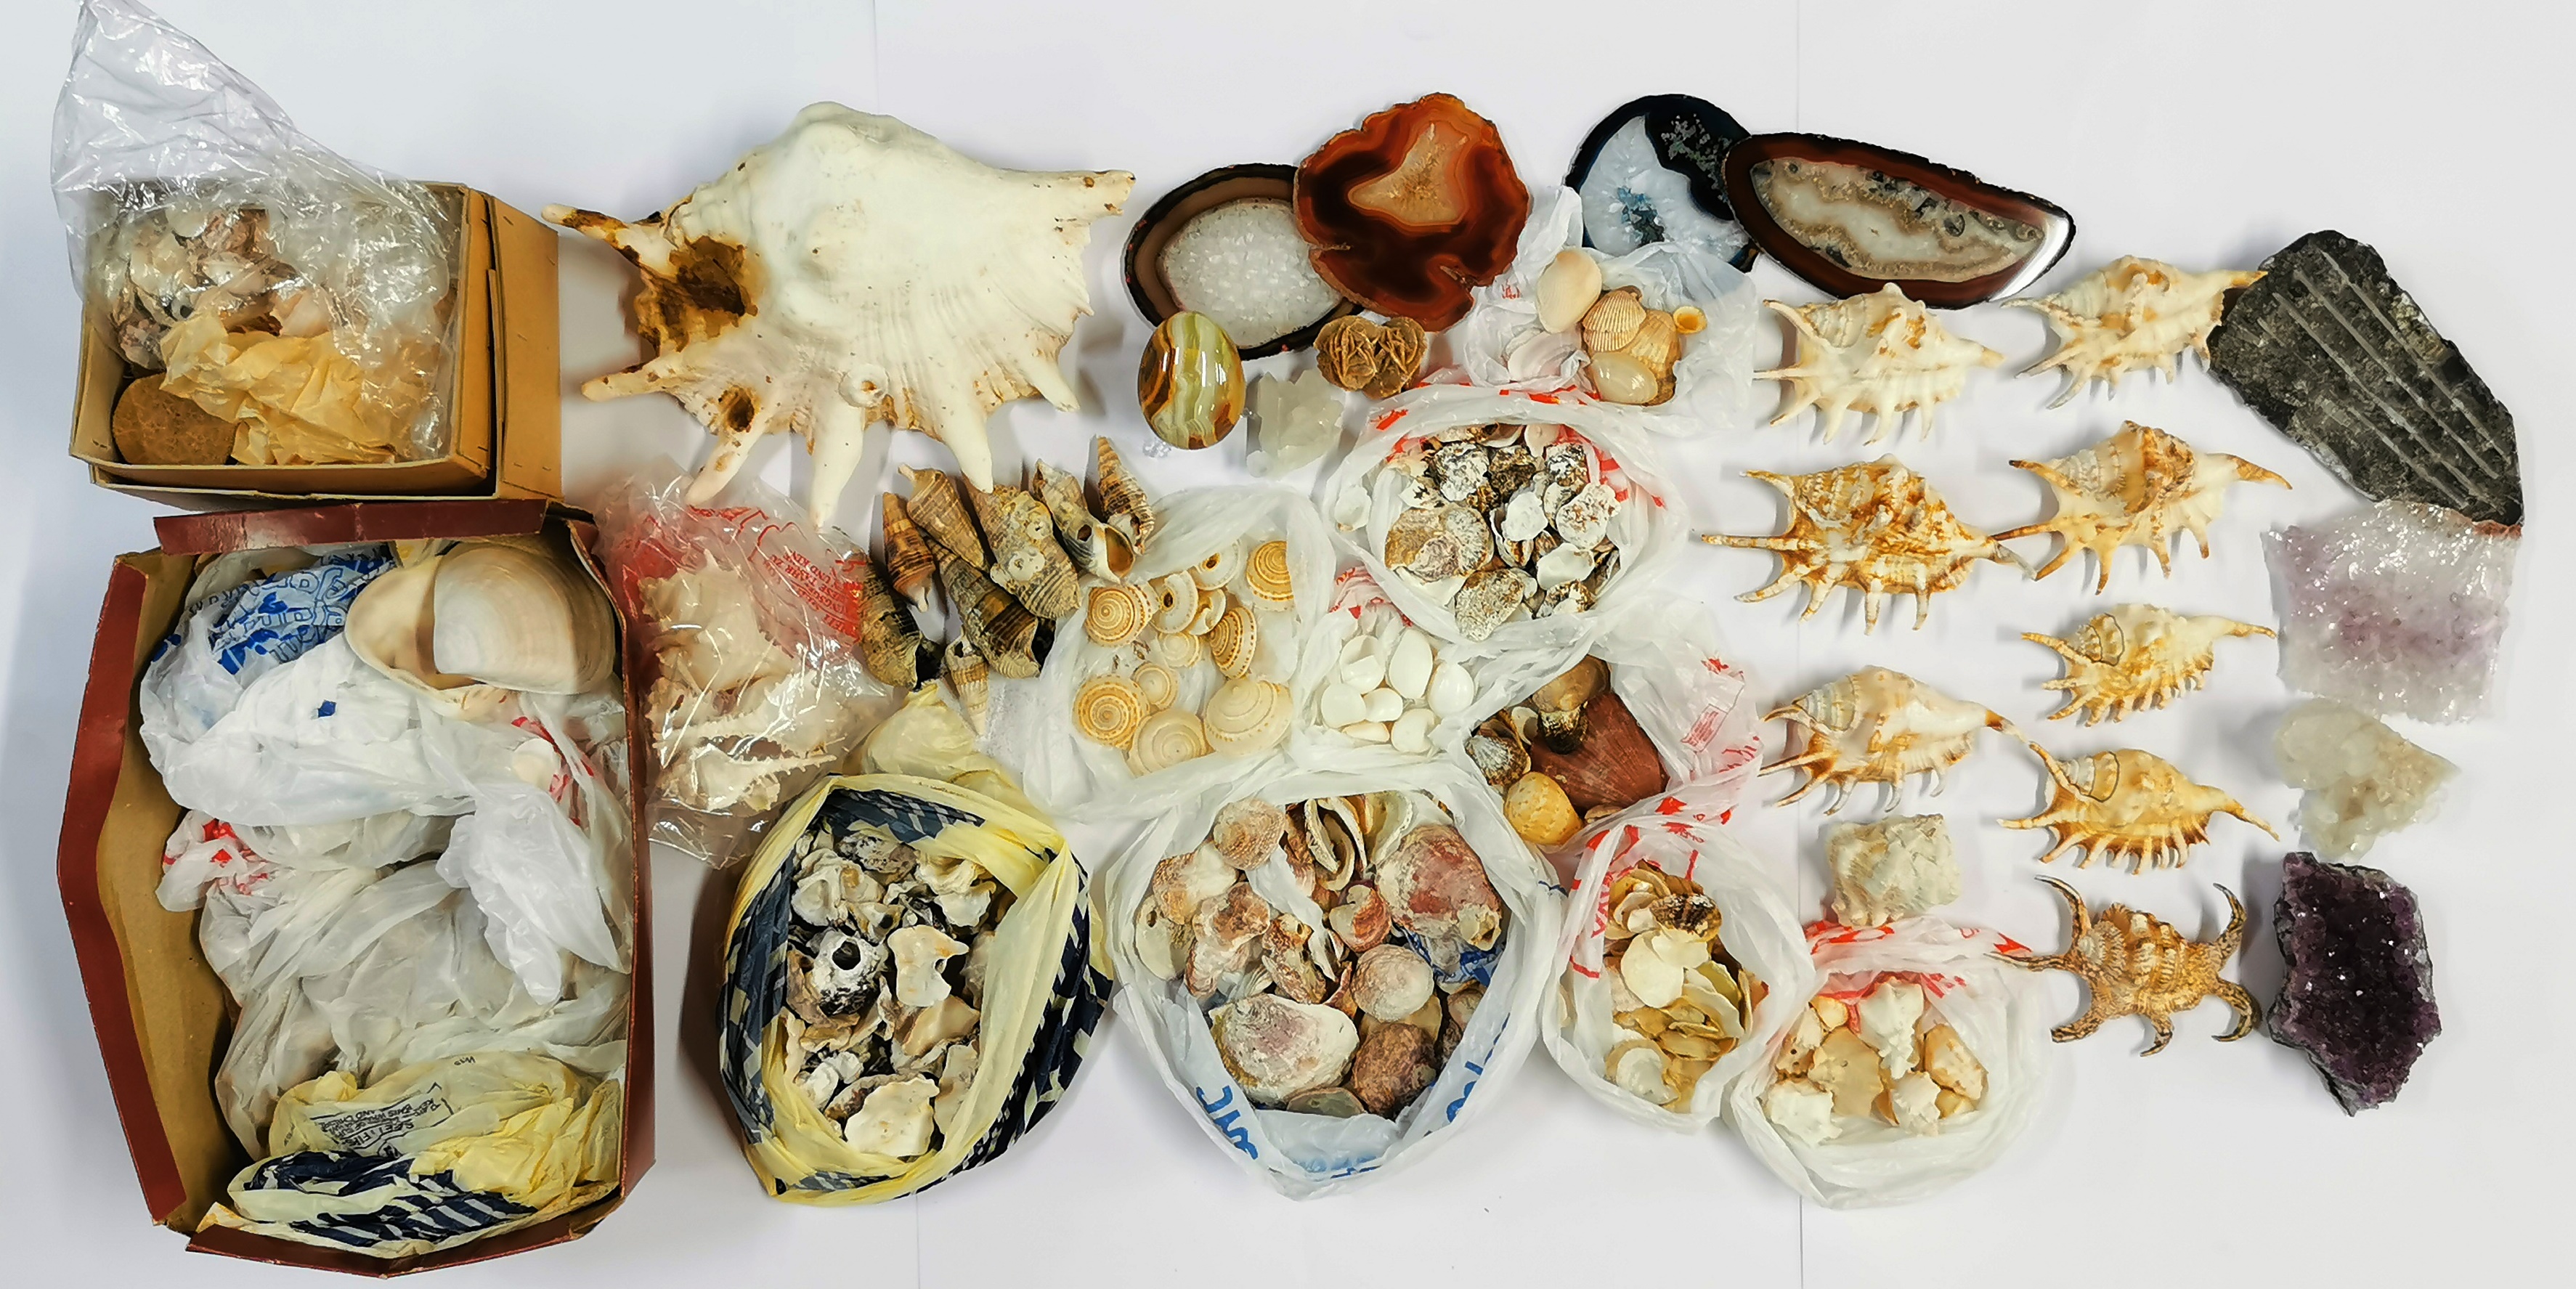 An extensive collection of sea shells and minerals.